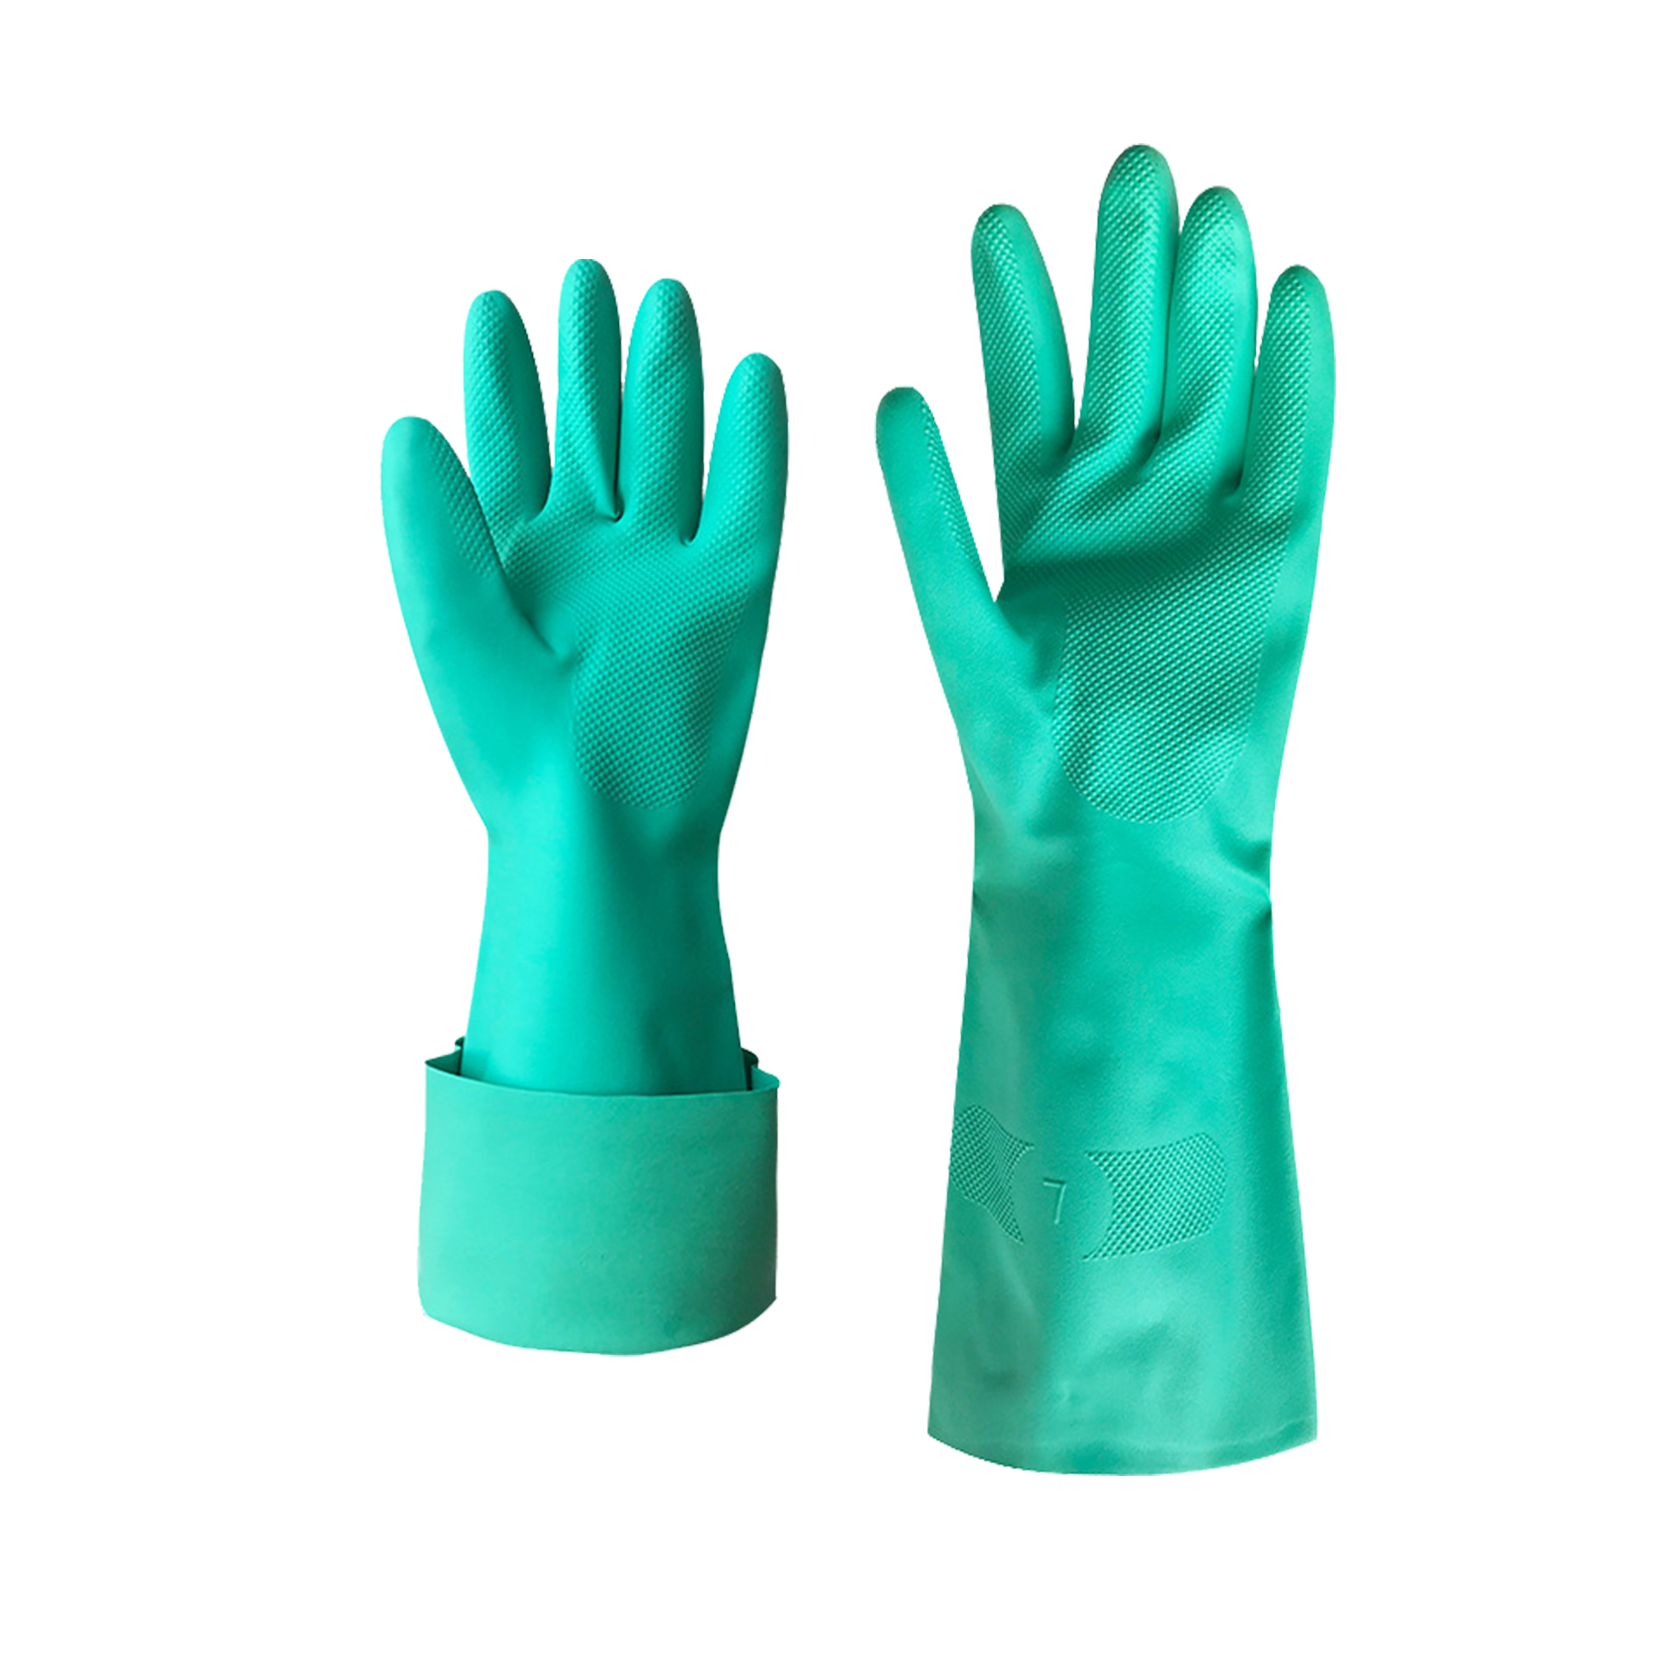 Nitrile Chemical Resistant Gloves, Reusable Heavy Duty Safety Work Gloves nga Walay Lining